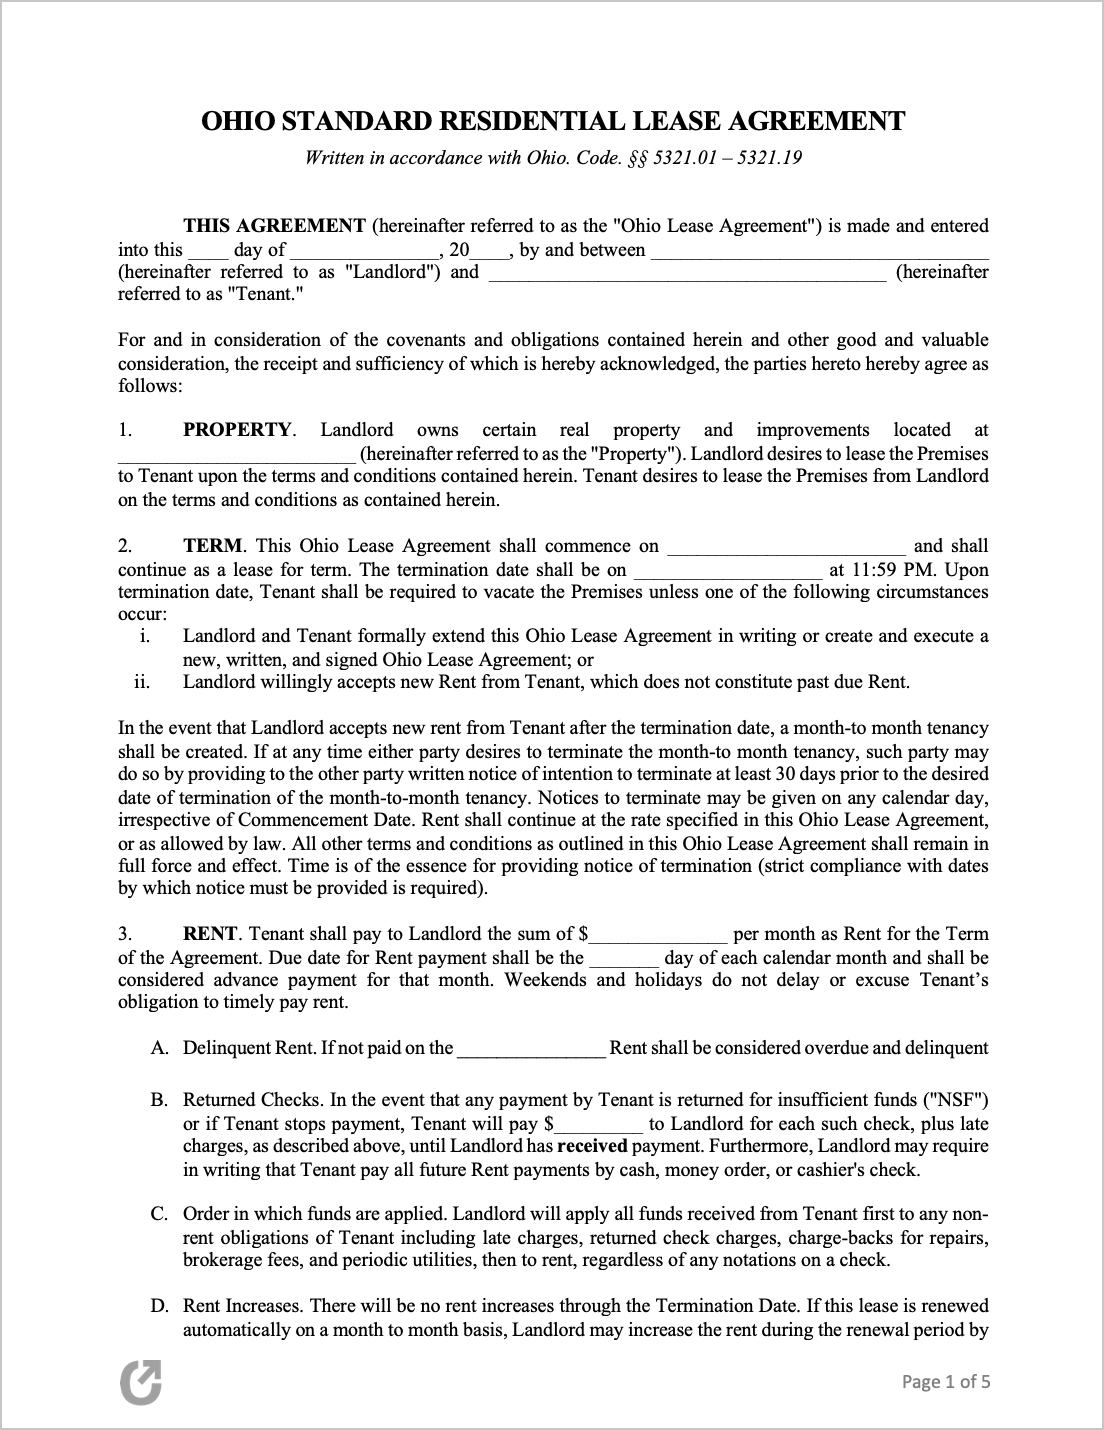 Free Ohio Rental Lease Agreement Templates  PDF  WORD  RTF Pertaining To free residential lease agreement template